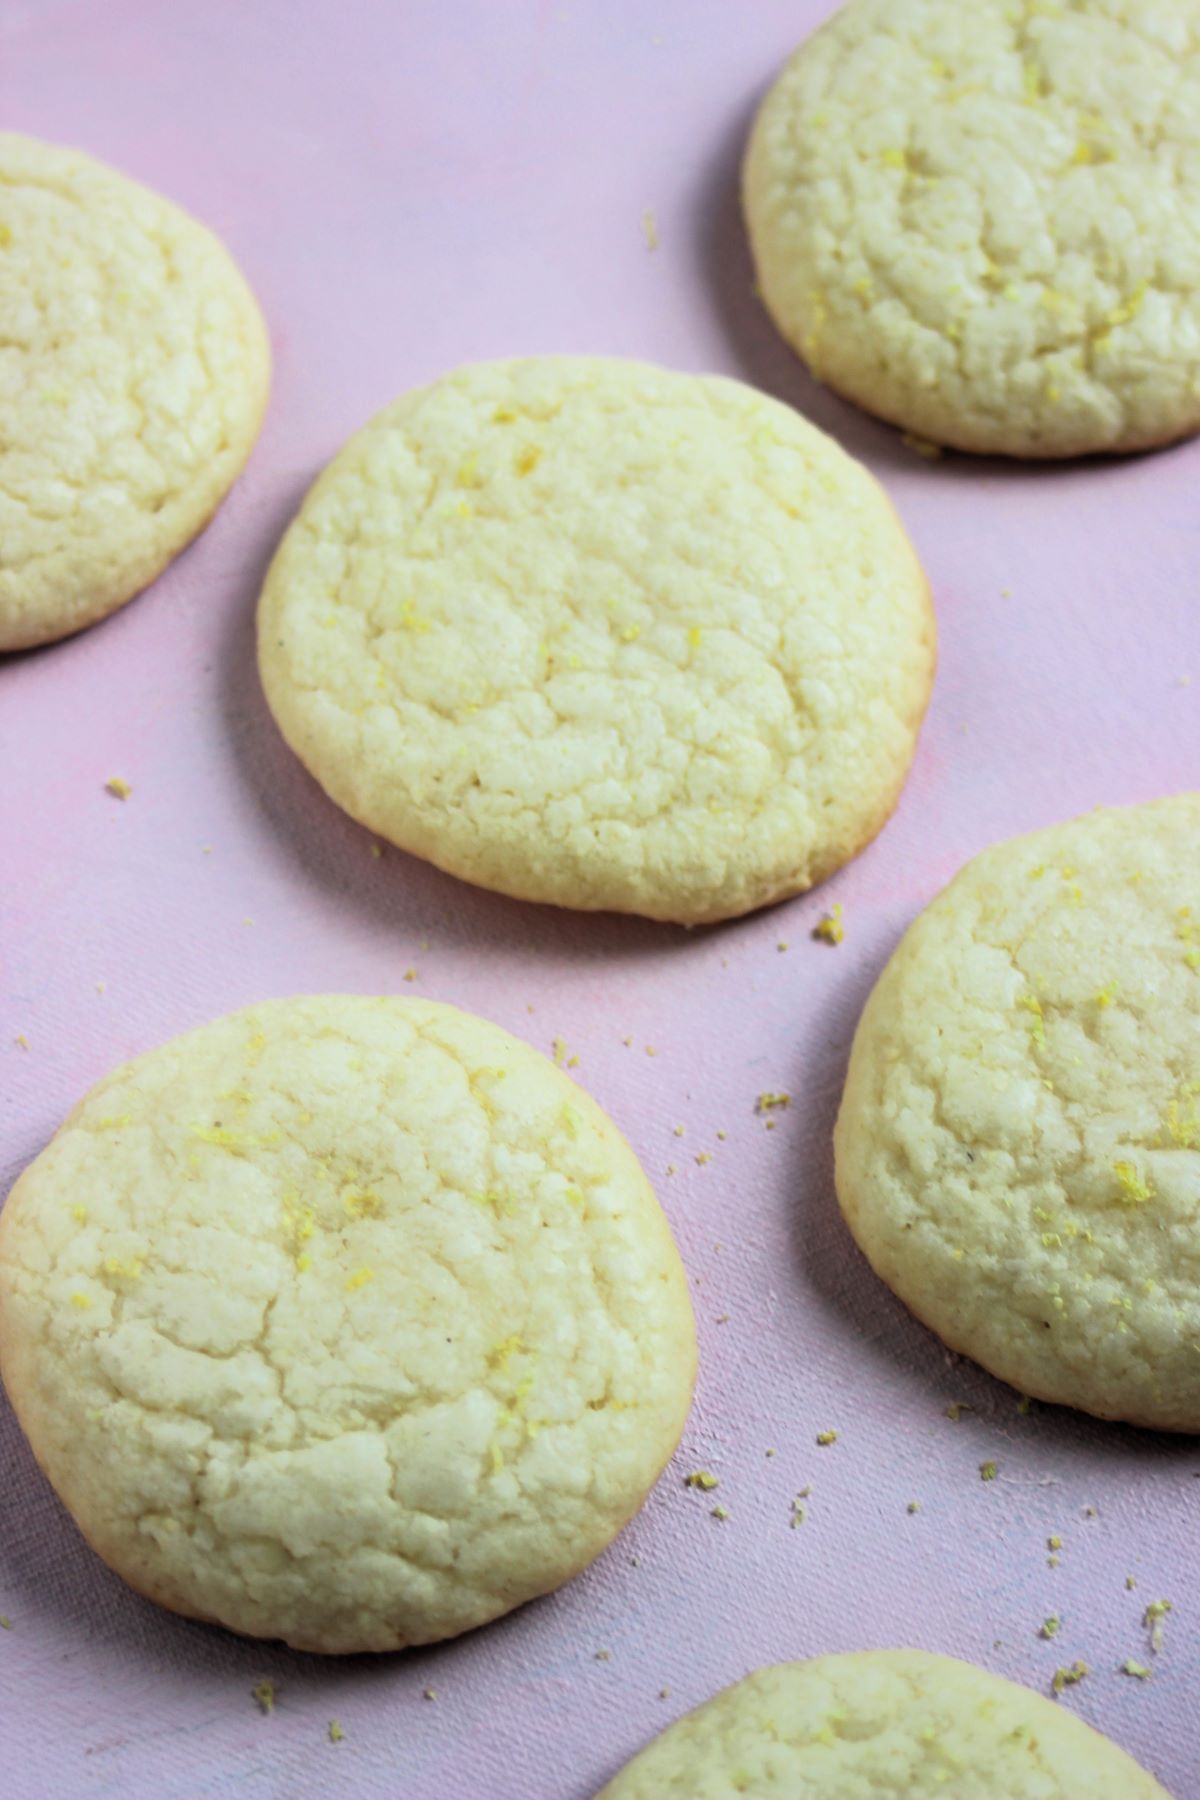 Lemon cookies on a pink surface.